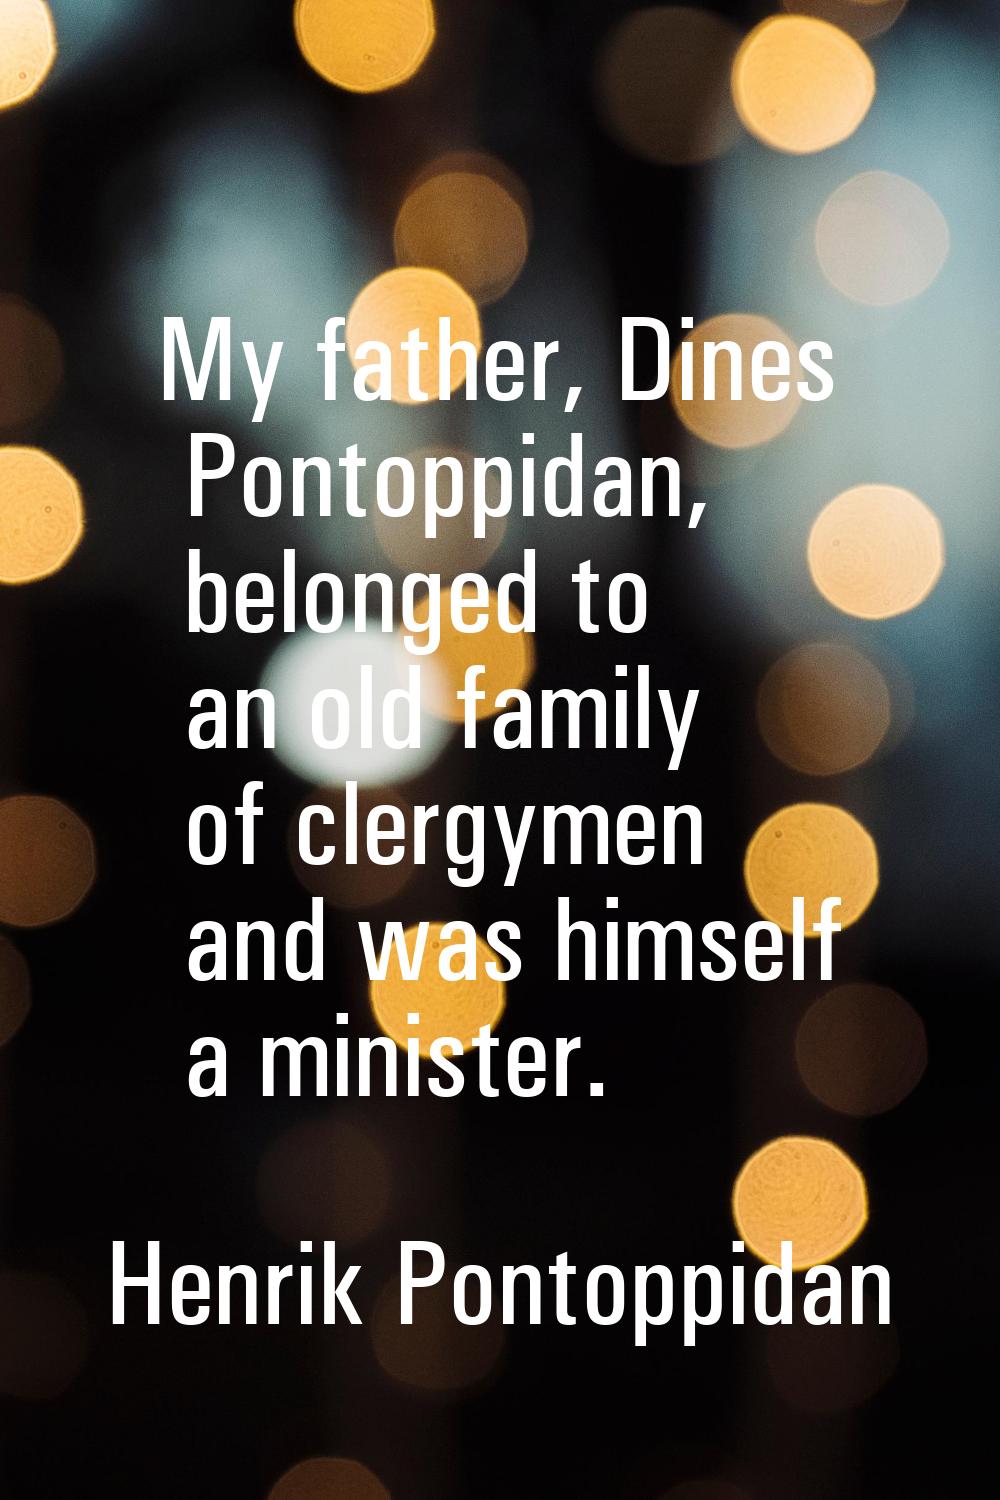 My father, Dines Pontoppidan, belonged to an old family of clergymen and was himself a minister.